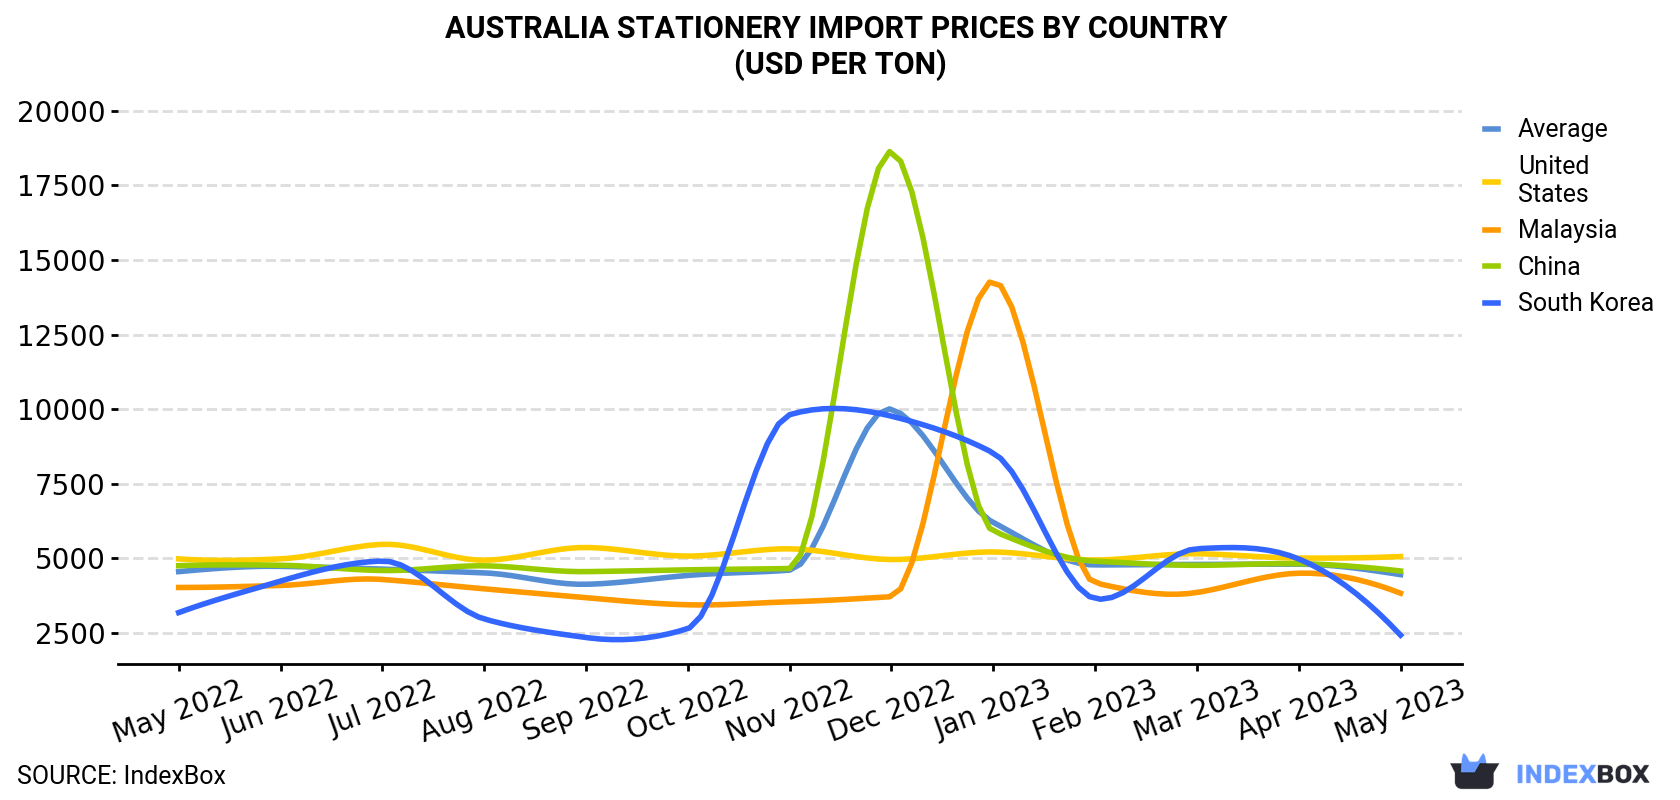 Australia Stationery Import Prices By Country (USD Per Ton)